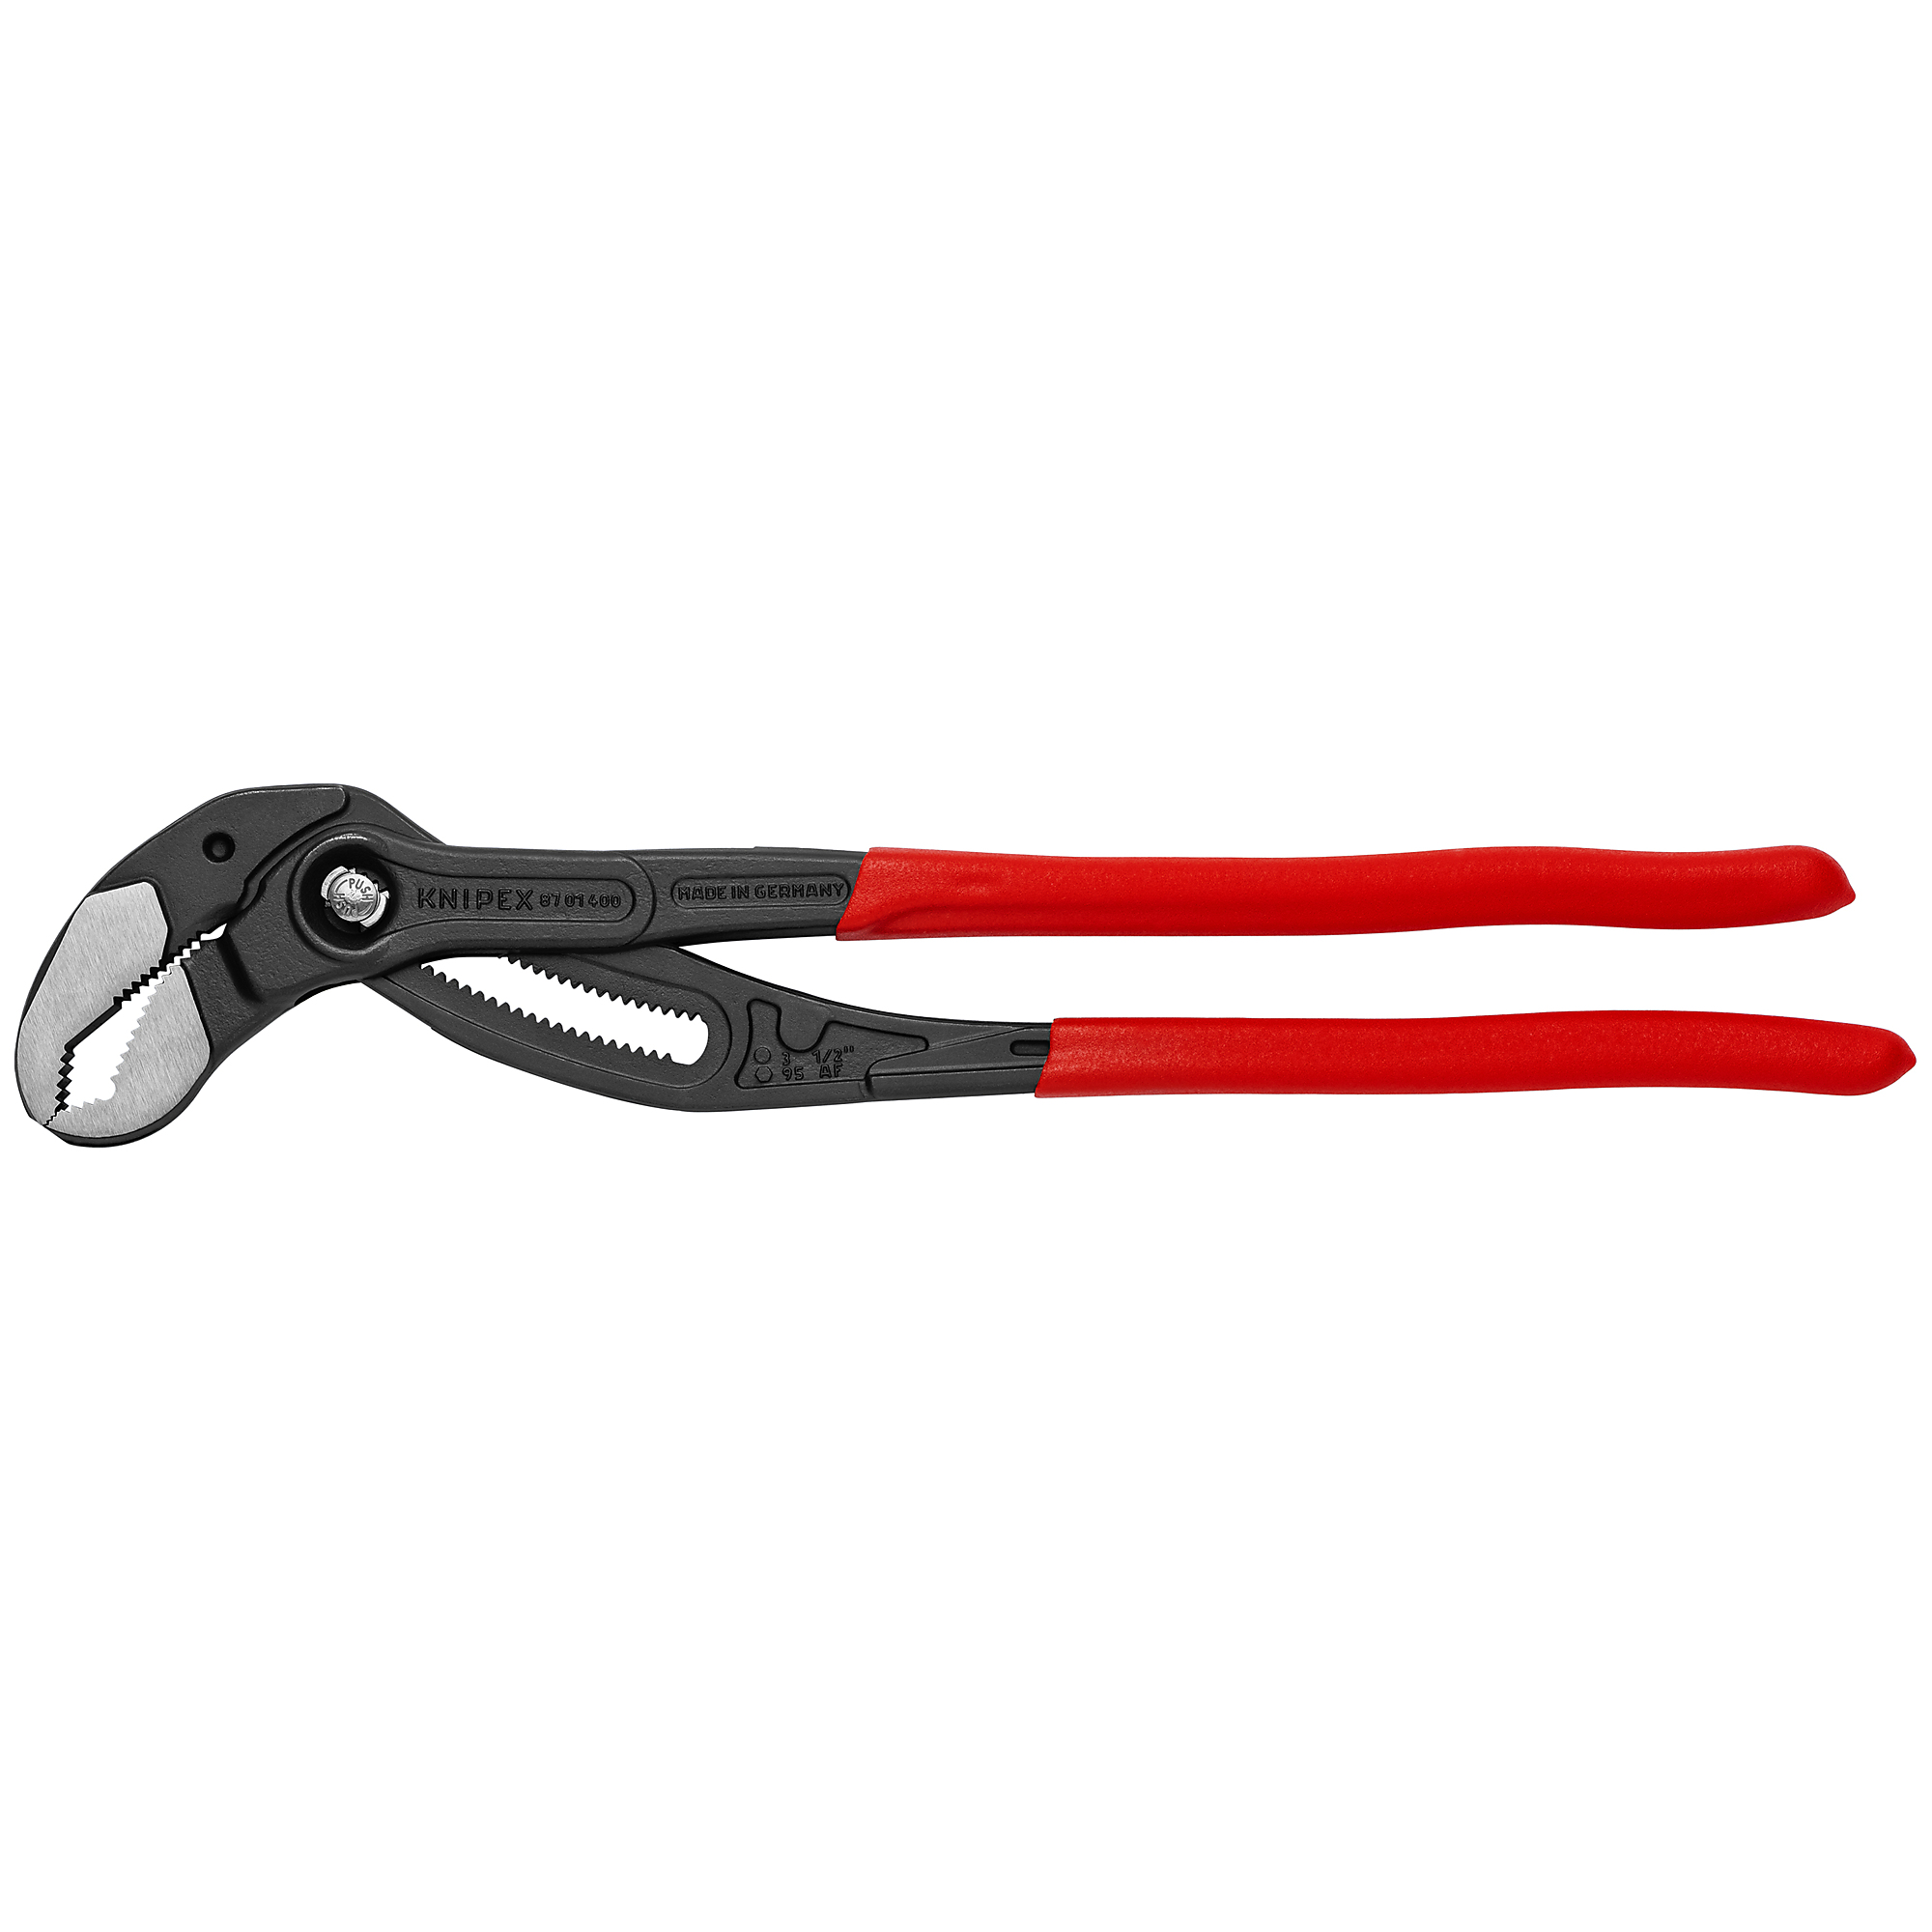 KNIPEX Cobra , Cobra XL Water Pump Pliers, Plastic coating, 16Inch, Pieces (qty.) 1 Material Steel, Jaw Capacity 3.75 in, Model 87 01 400 US